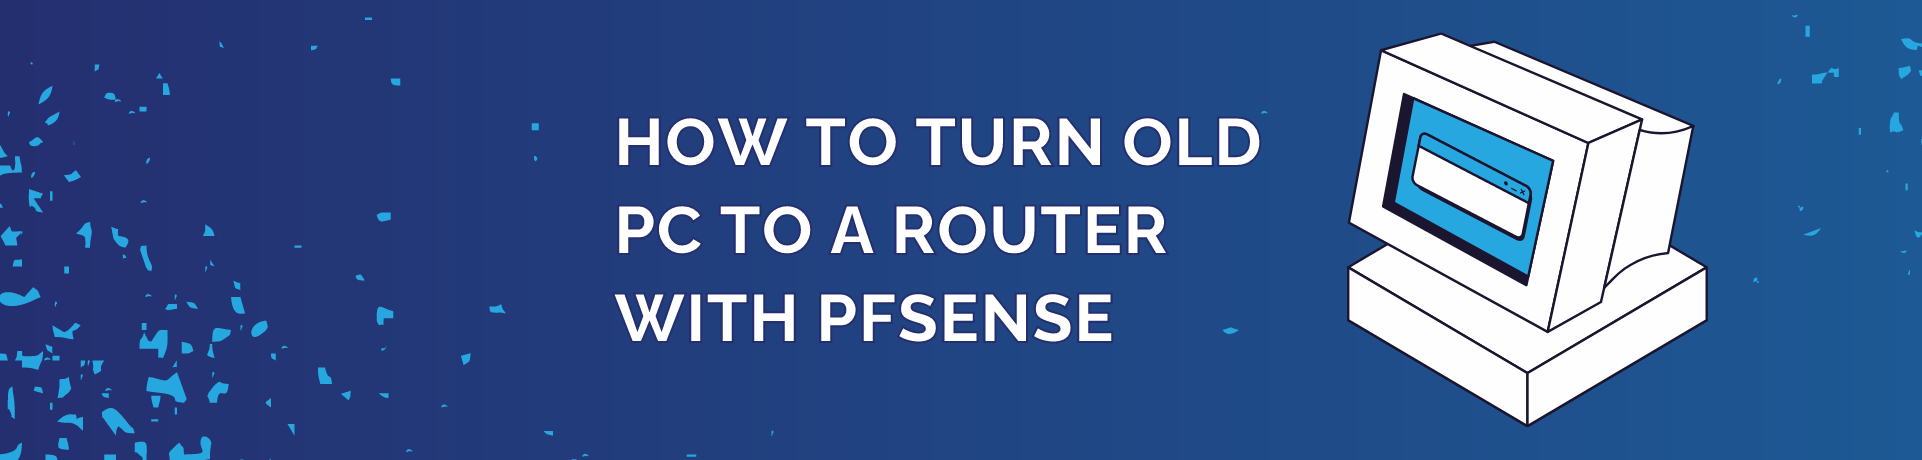 How to turn old PC to a router with pfSense featured image